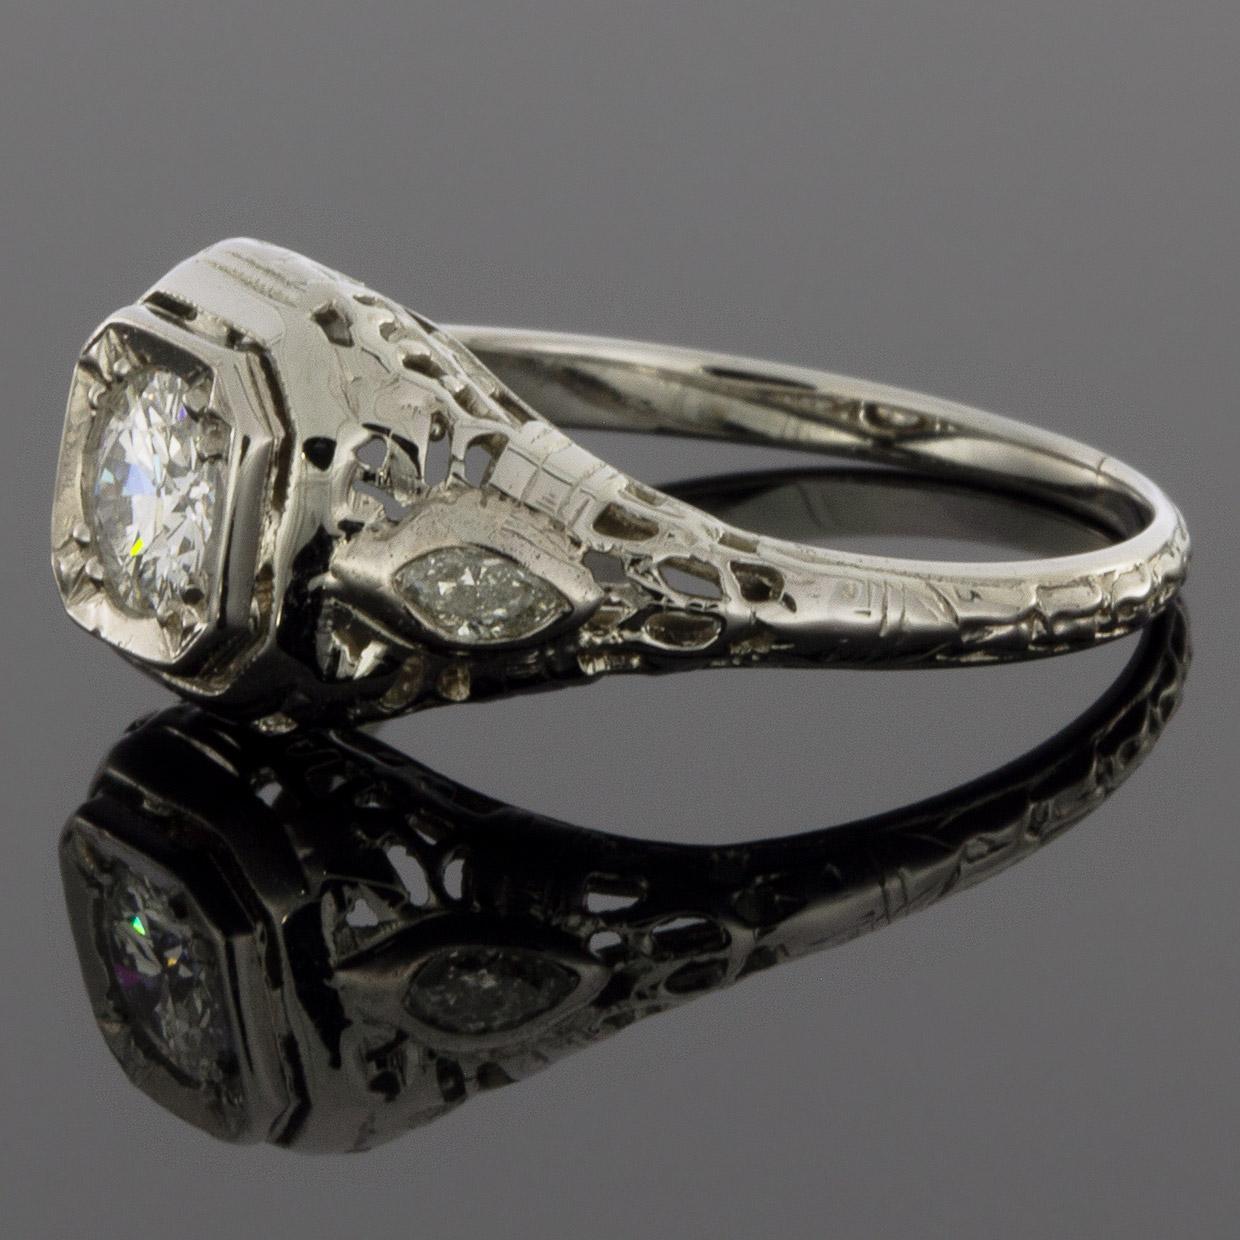 Product Details:
Estimated Retail:  $6,000.00
Certification/Grading:  Yes
Metal: White Gold
Metal Purity: 18k
Style: Solitaire with Accents
Sizable: YES
Condition: New


